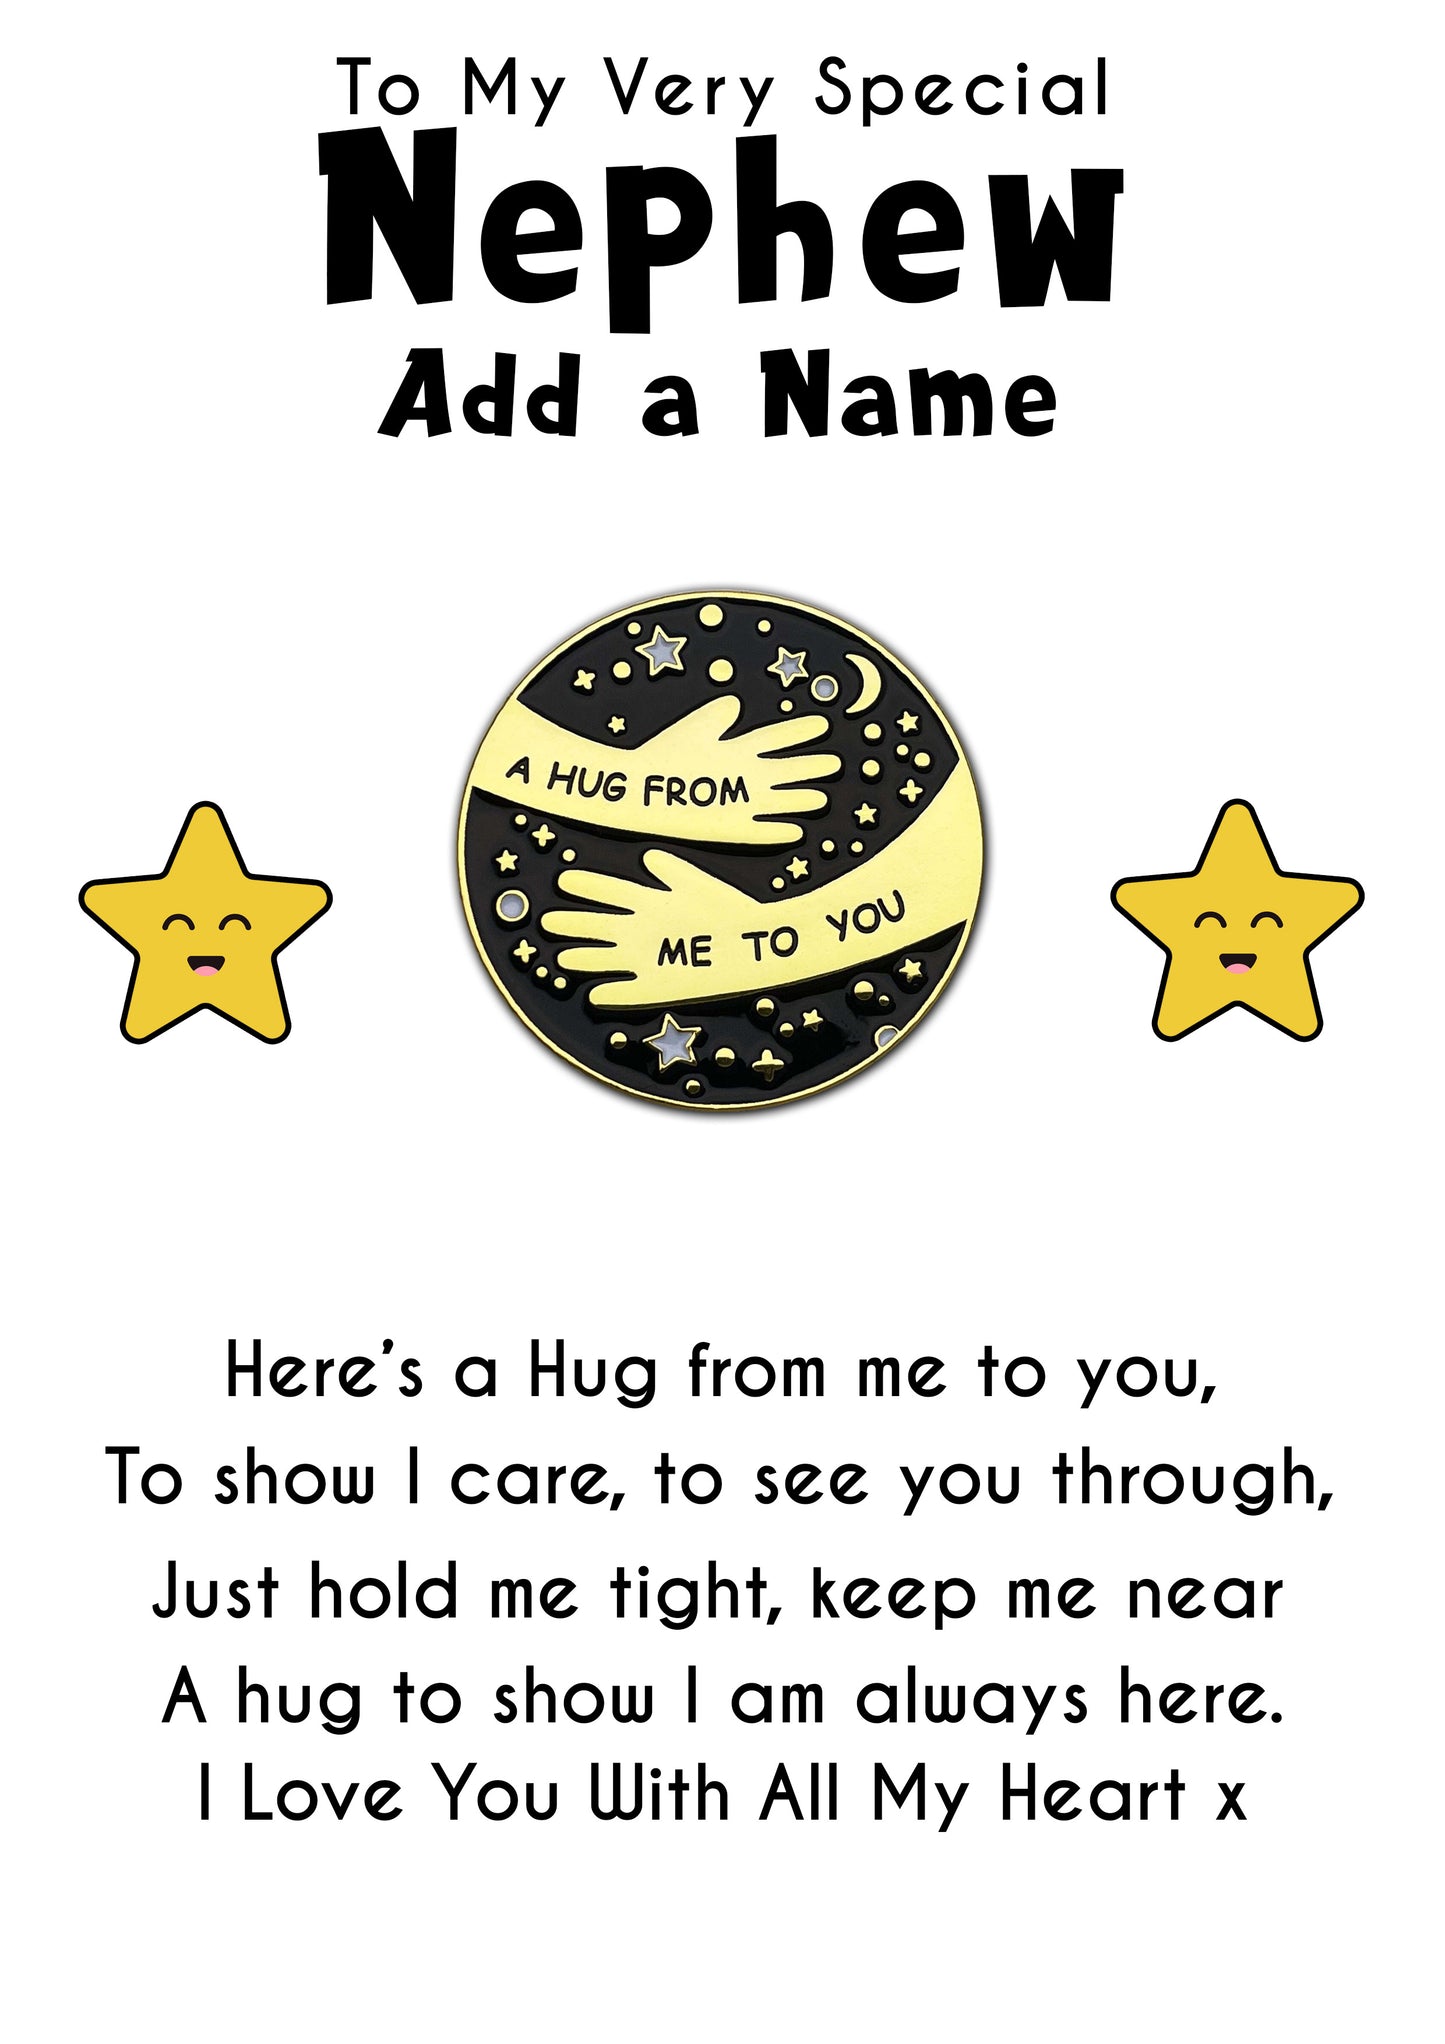 Pocket Hug Pin Badges With Very Special Nephew Star Message Cards